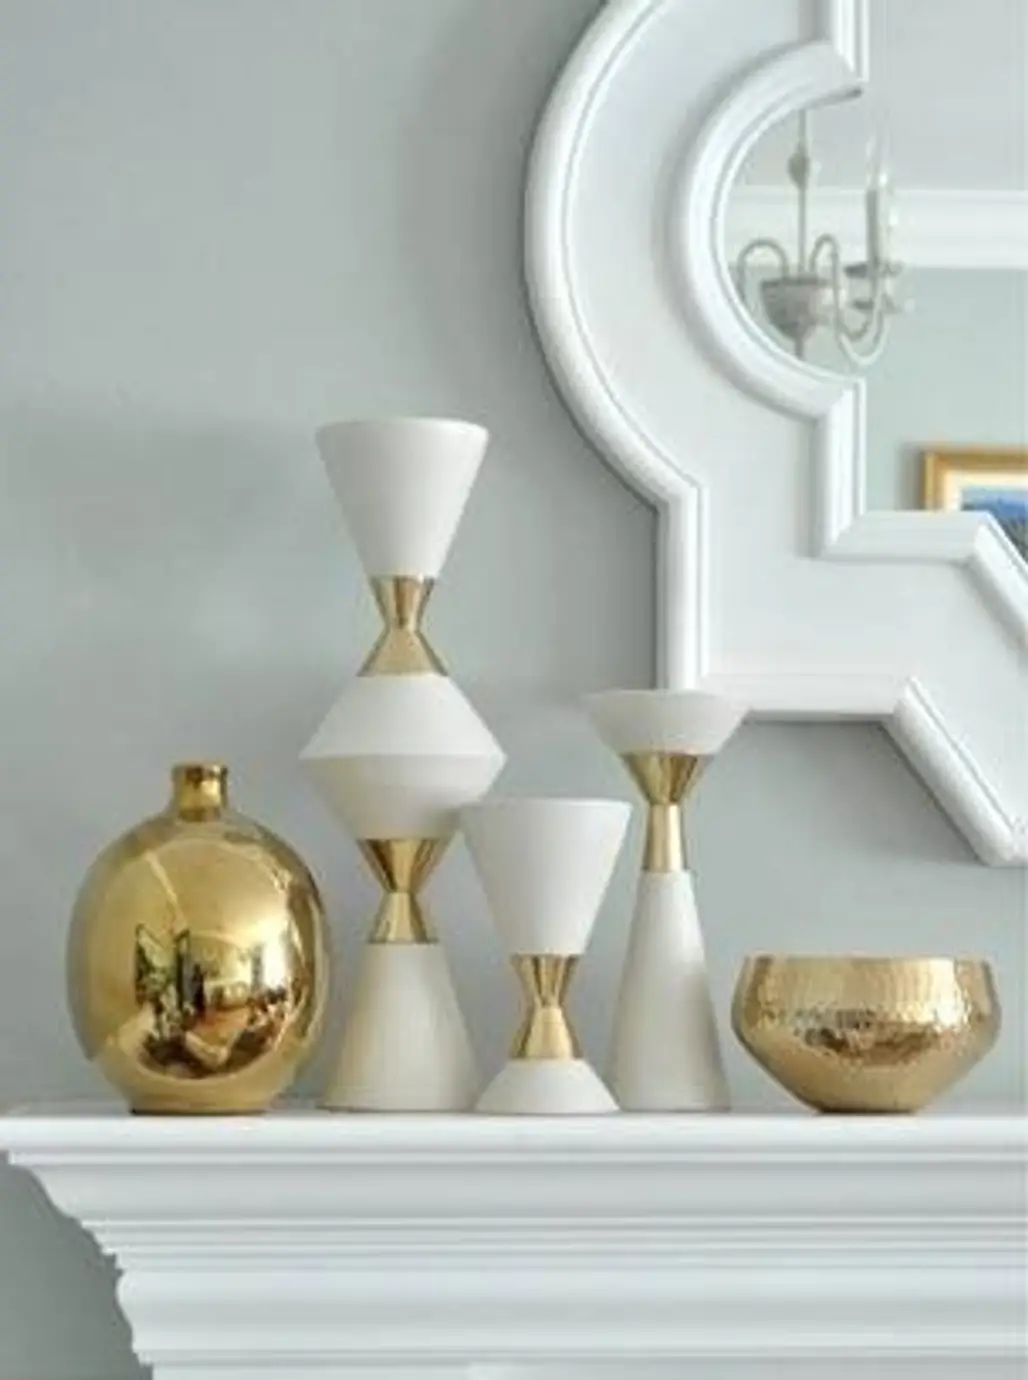 White and Gold Vases on the Mantle